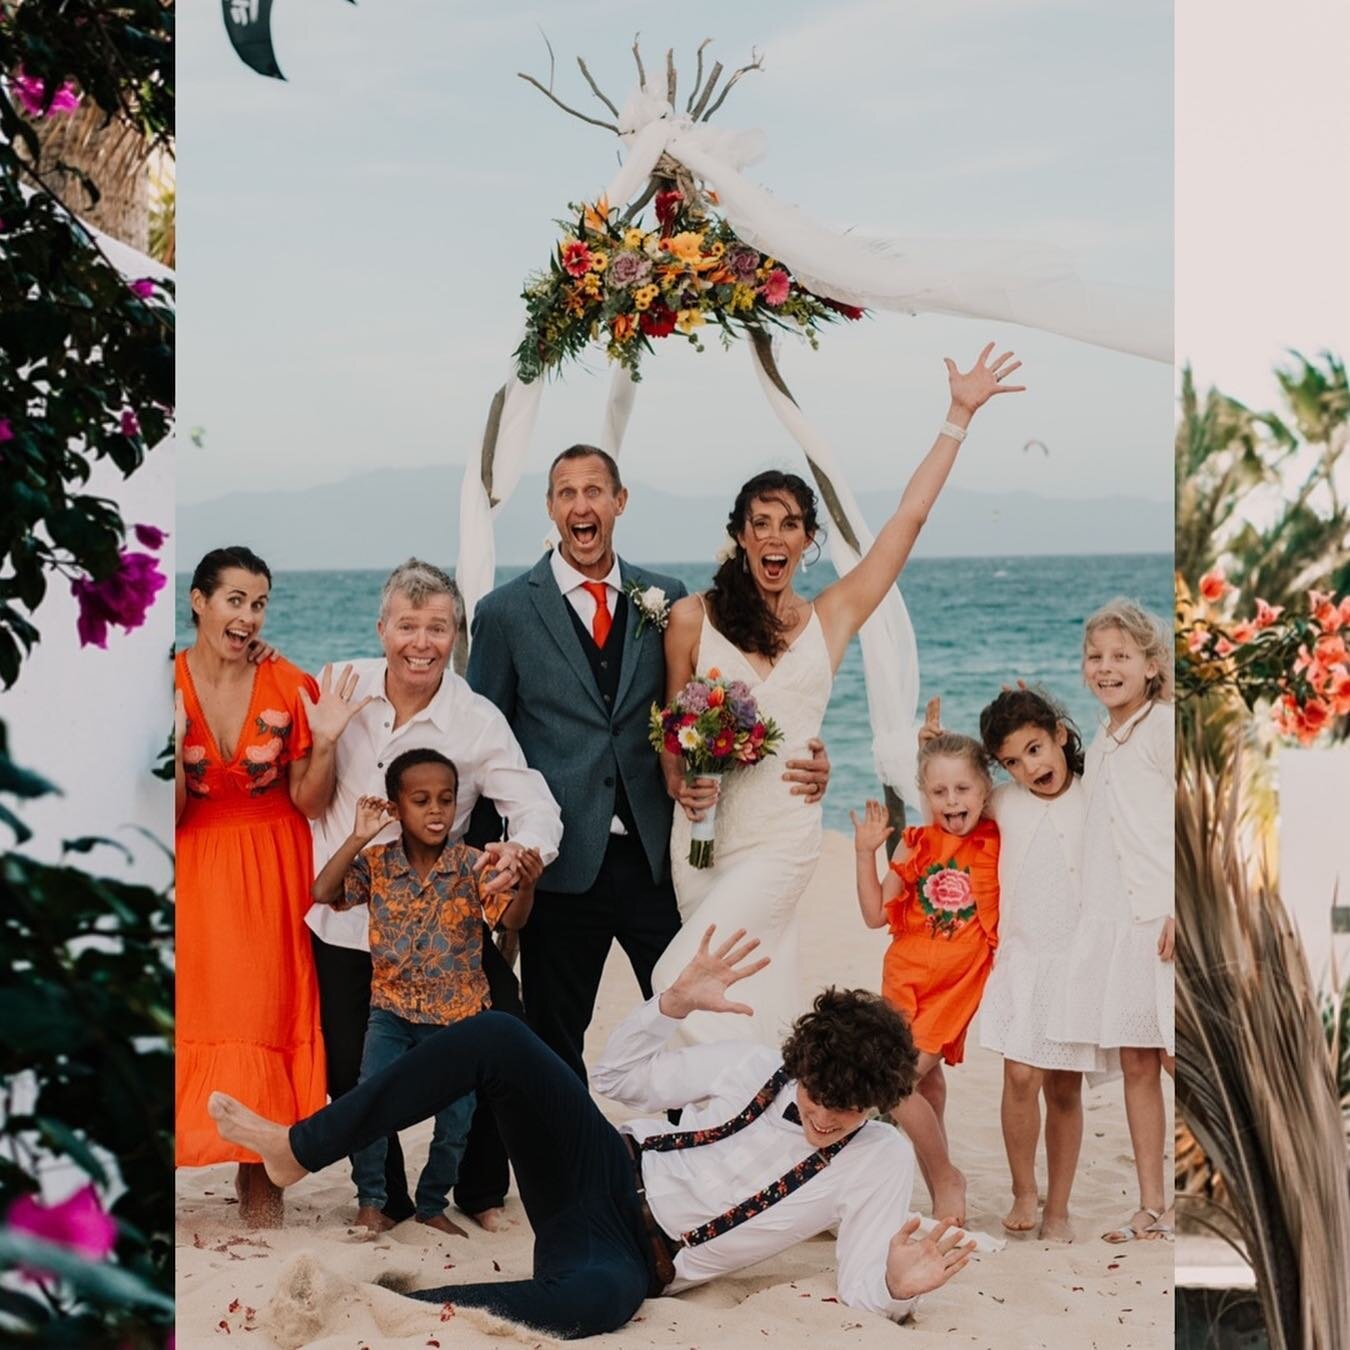 Pro tip for planning an elopement: Get inspiration from the location where you&rsquo;re eloping!⁠⁠
⁠⁠
Check out this gorgeous elopement for a bit of creative inspo! 😉